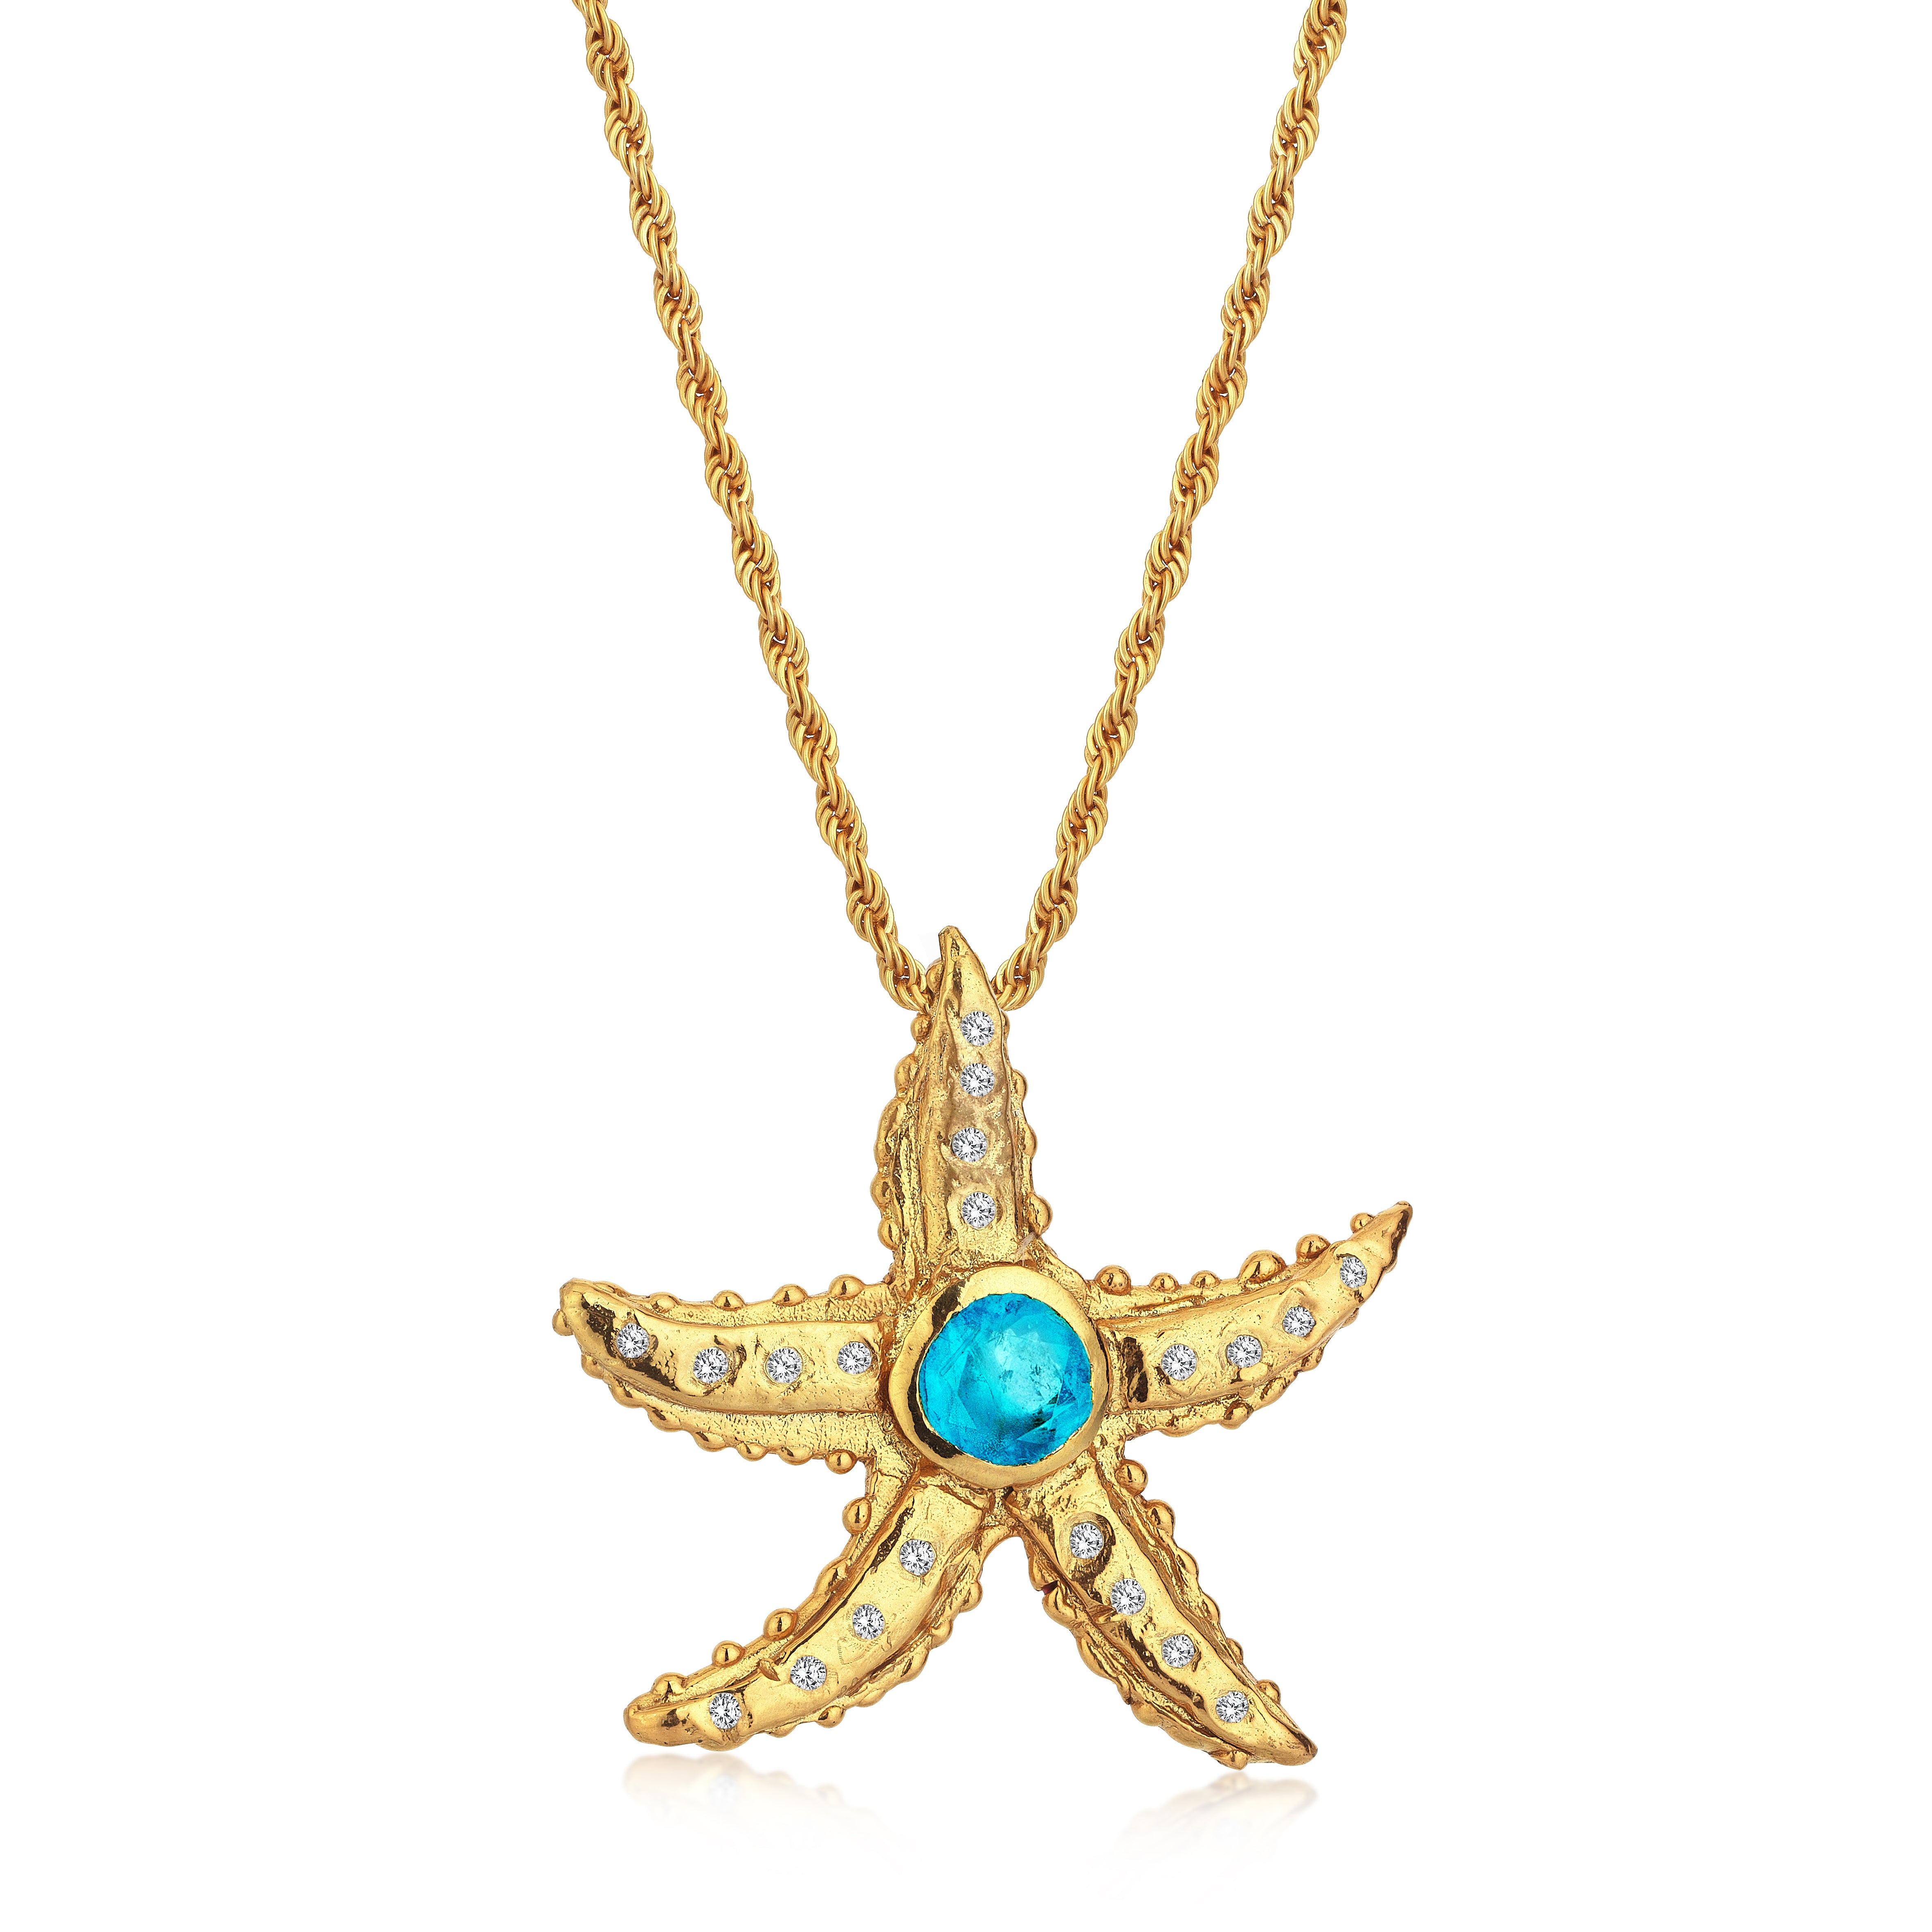 THE SEA STAR NECKLACE